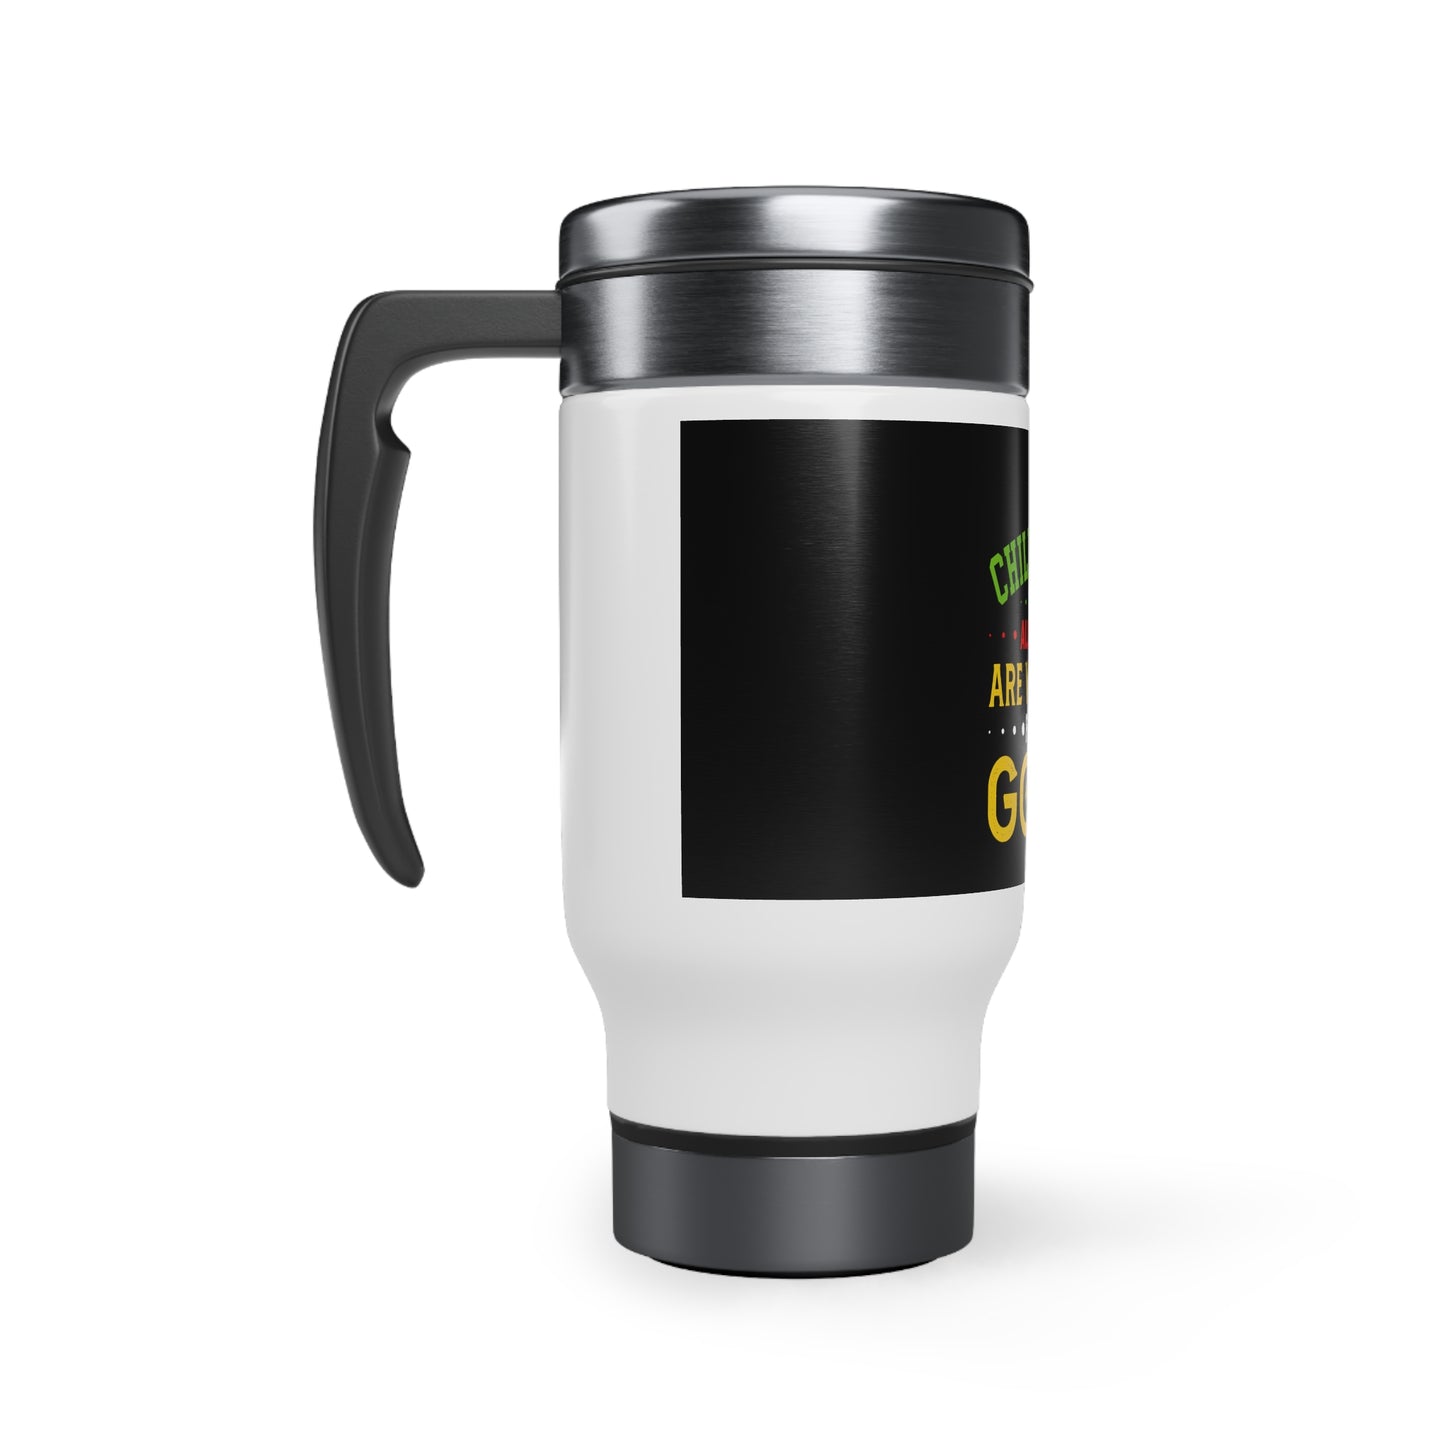 Child Of God All Things Are Working For My Good Travel Mug with Handle, 14oz Printify